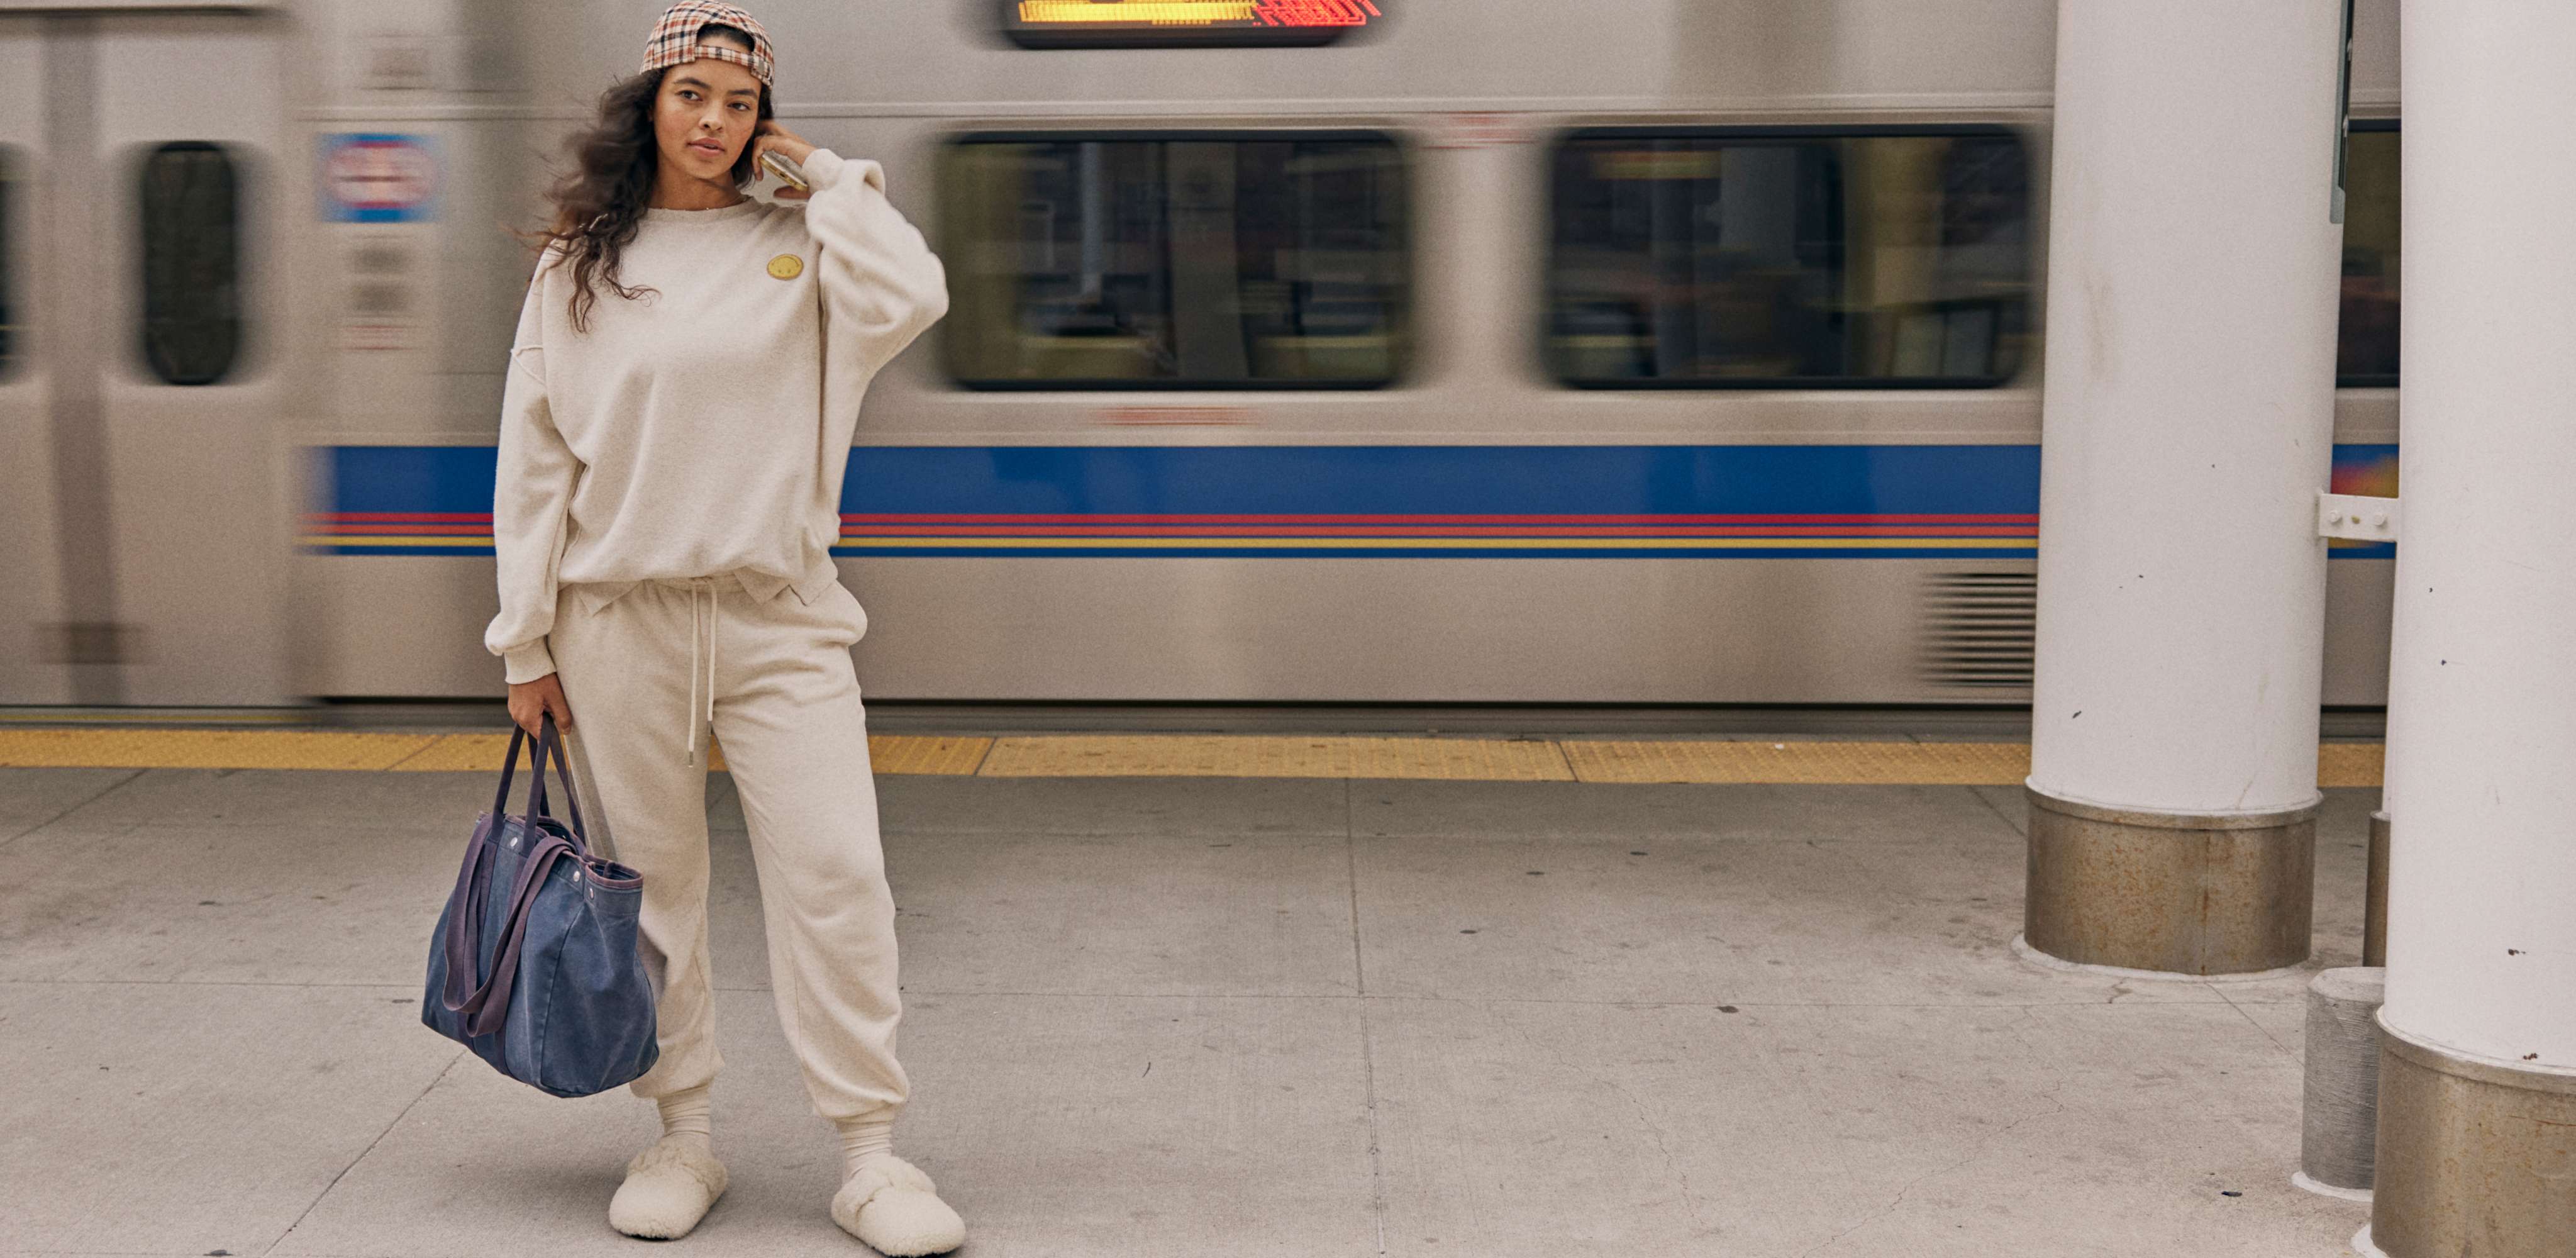 Model in front of subway wearing white crewneck and sweatpants 